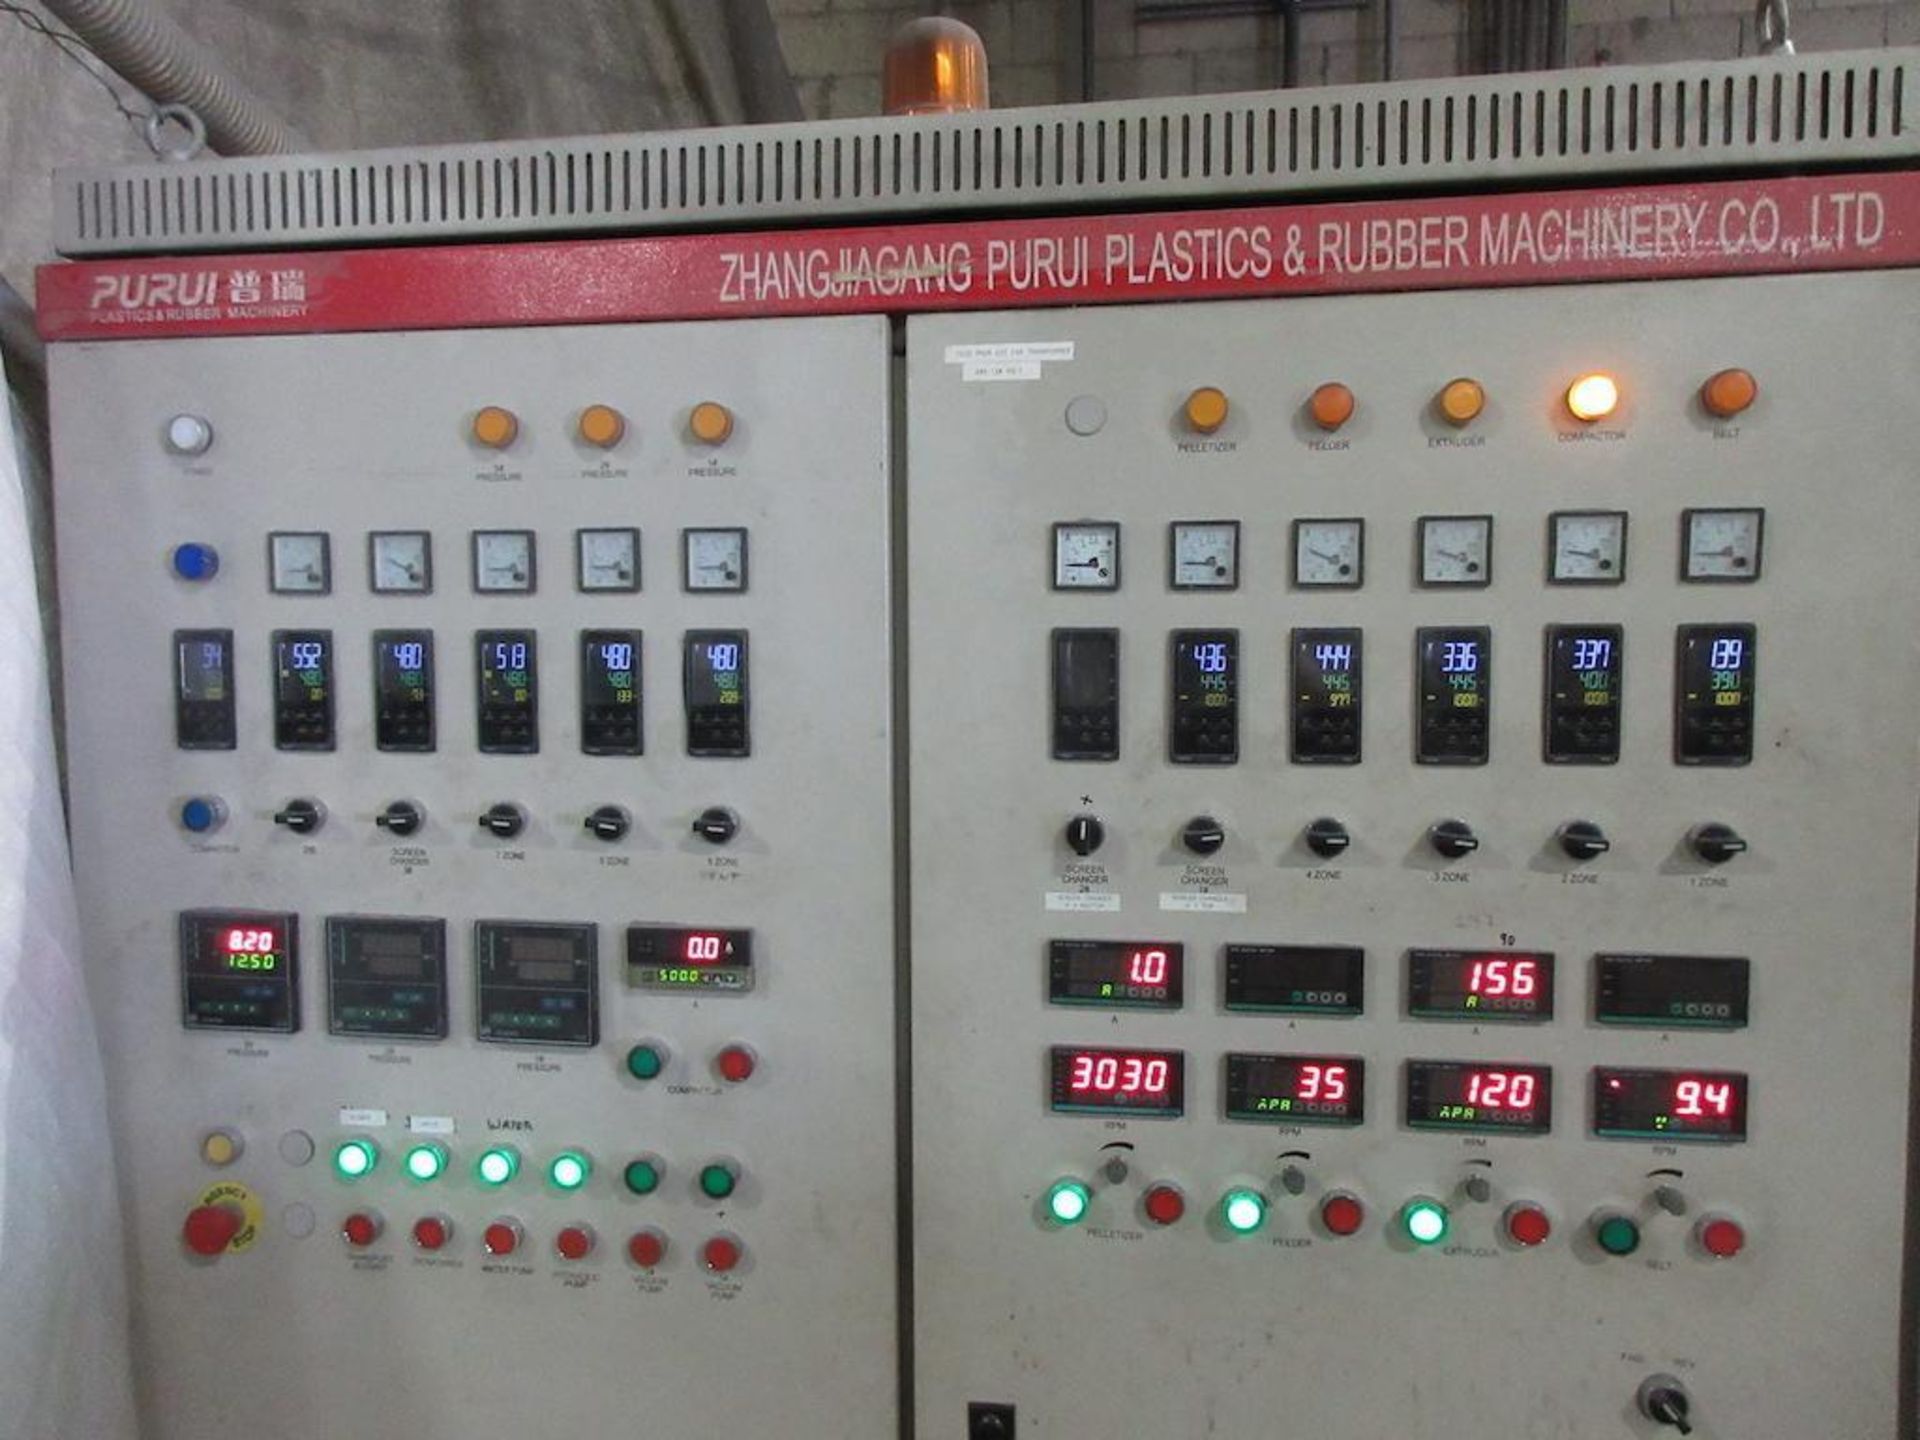 2012 Zhangjiagang Pelletizing Production line, Featuring: Extruder Model ML 130/42, L/D 42:1, screw - Image 10 of 32